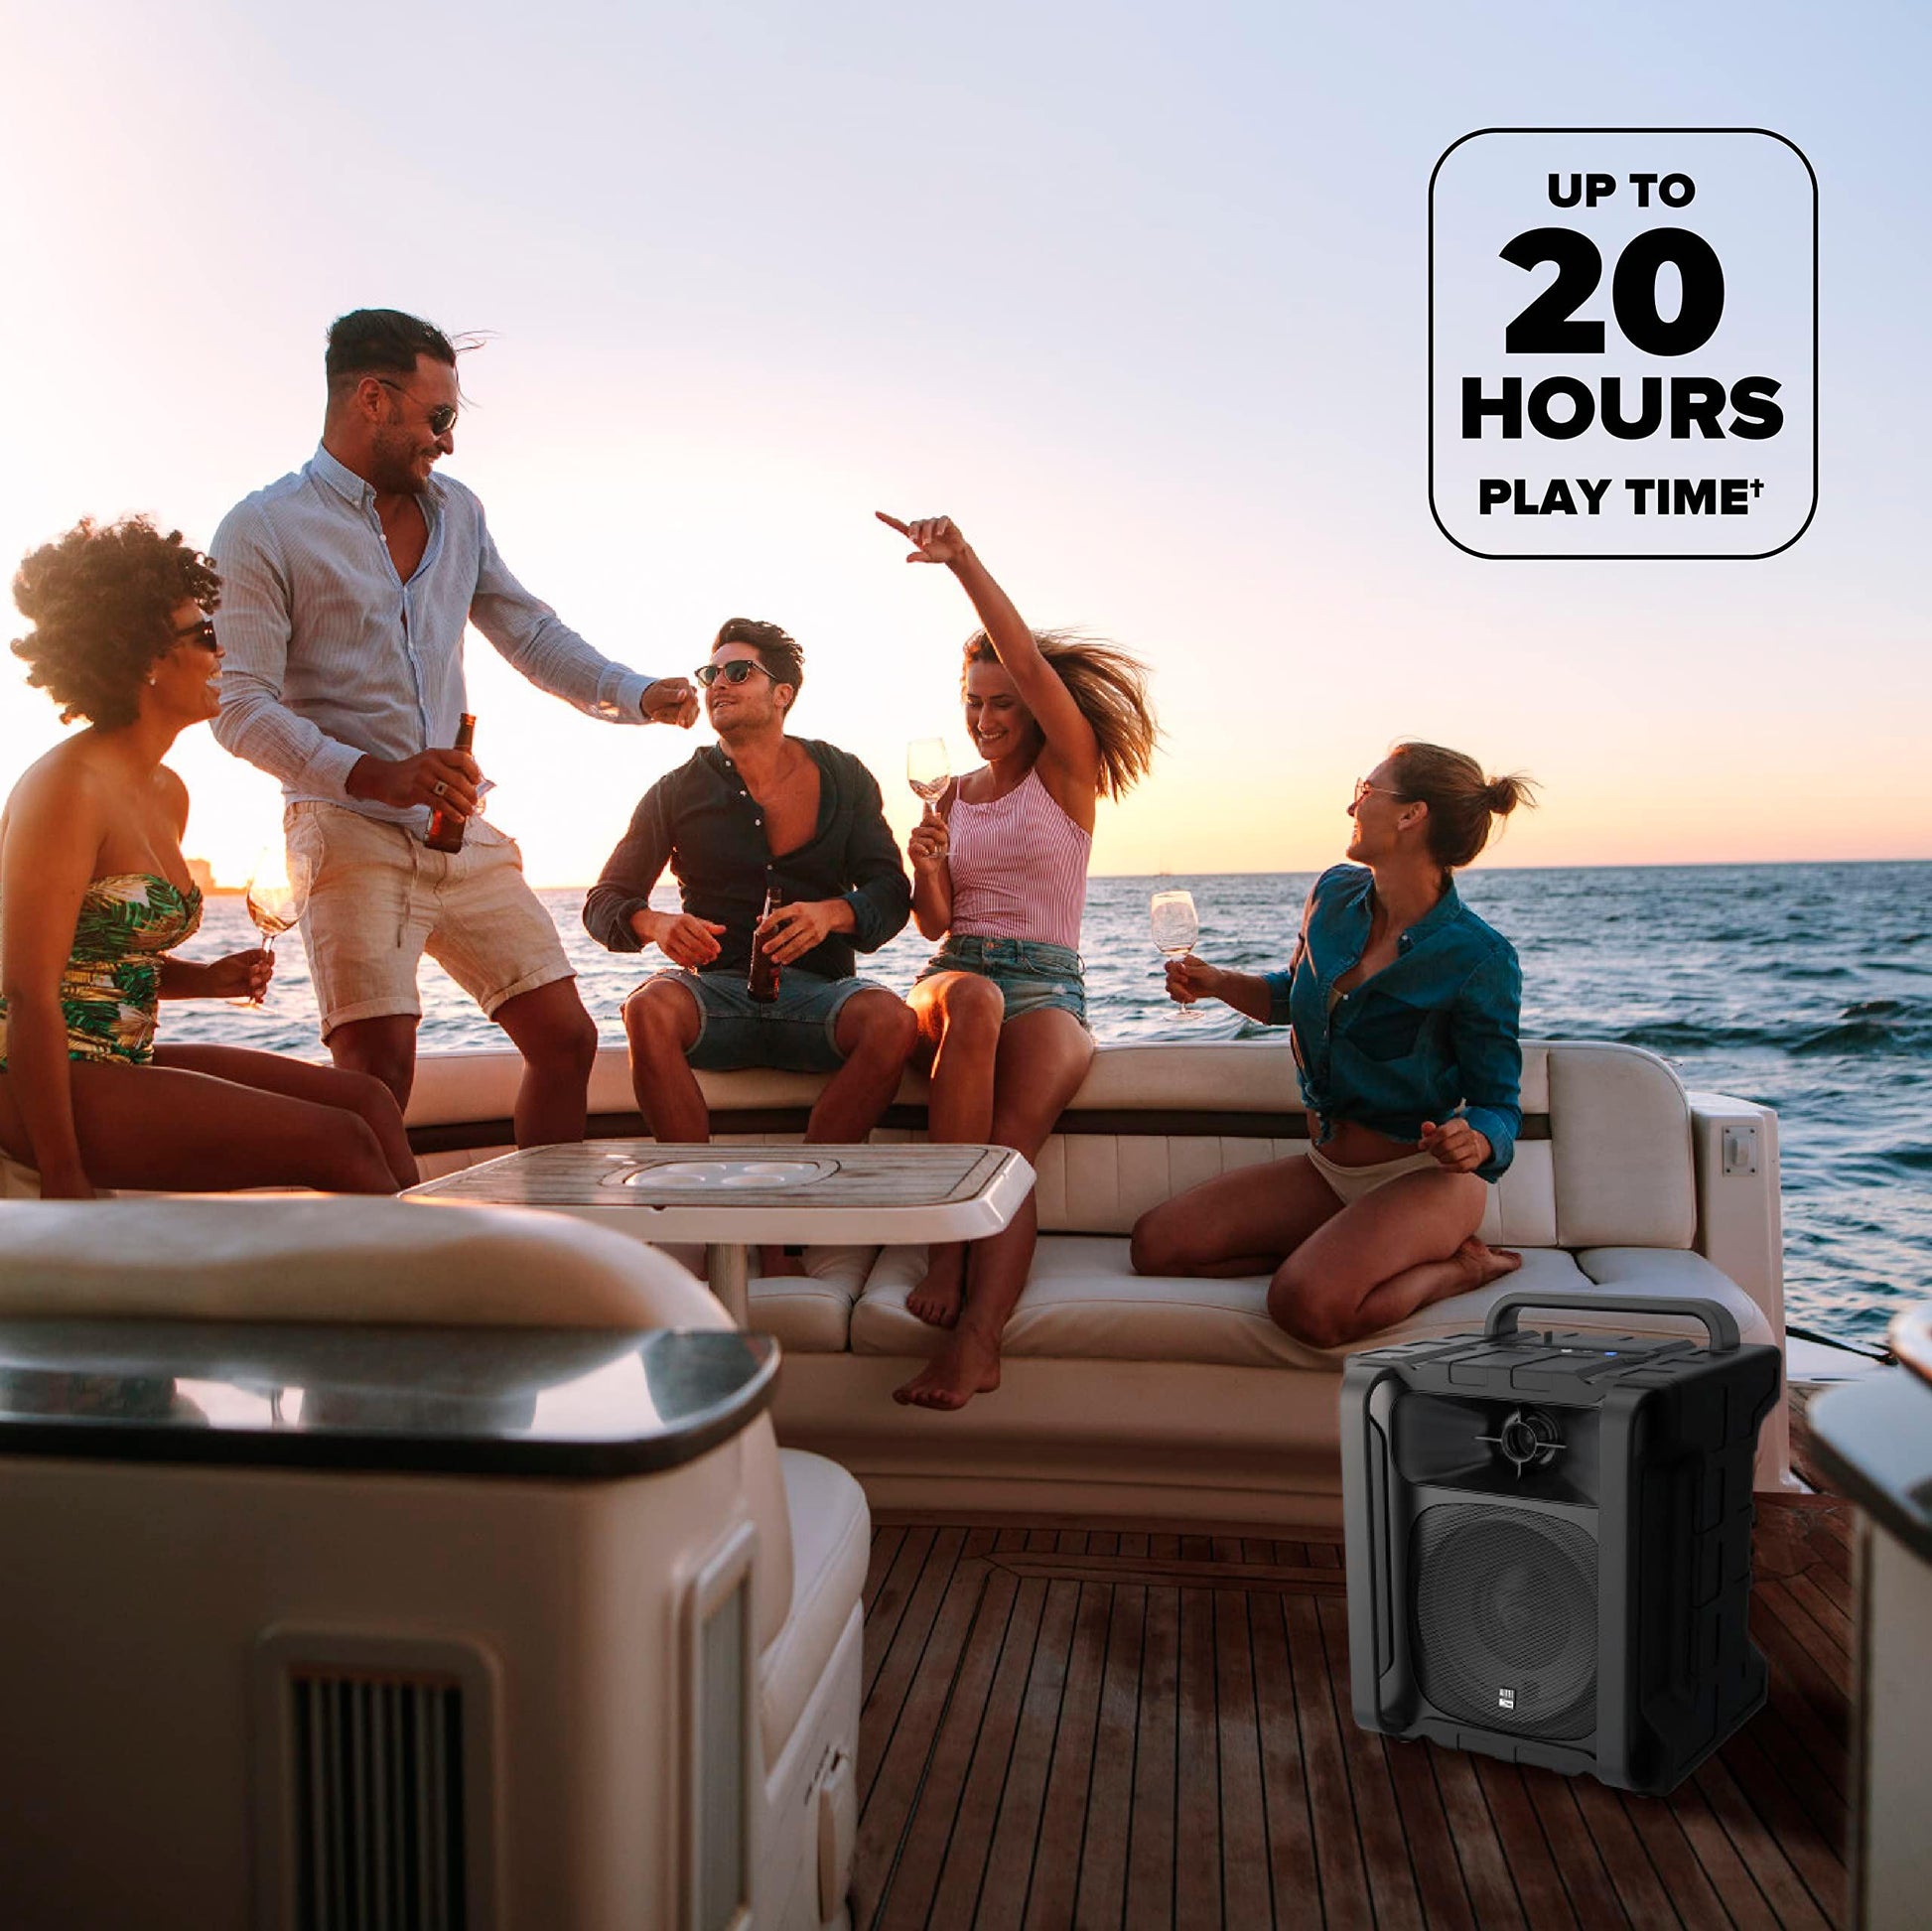 Altec Lansing Sonic Boom - Waterproof Bluetooth Speaker with Phone Charger, IP67 Outdoor Speaker, 3 USB Charging Ports, 50 Foot Range & 20 Hours Battery Life - CookCave